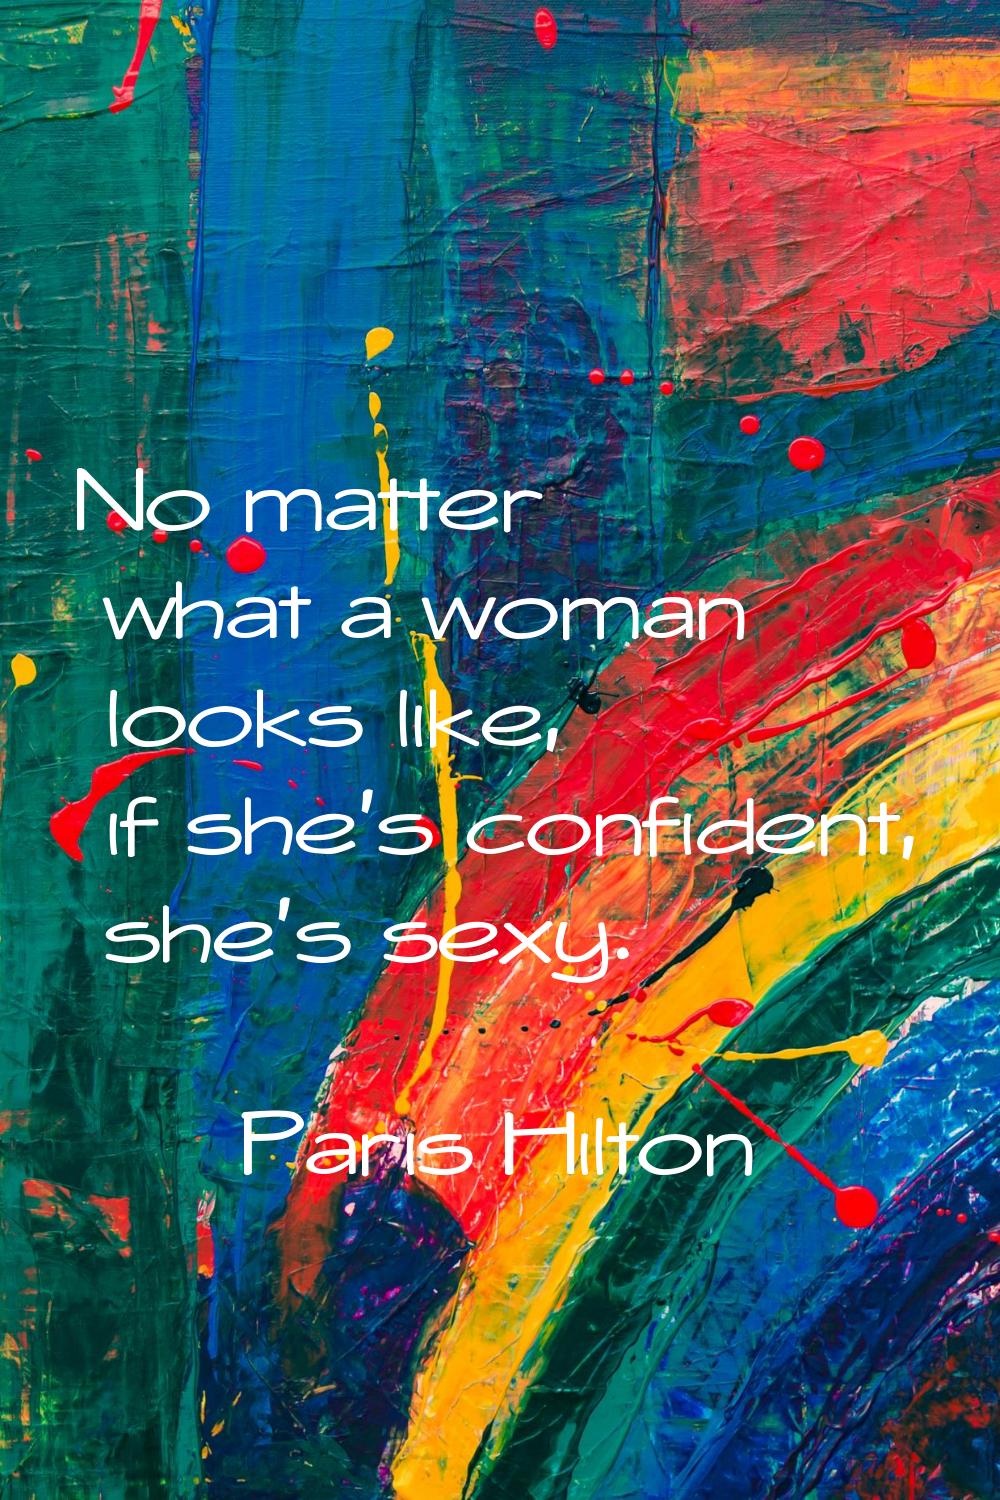 No matter what a woman looks like, if she's confident, she's sexy.